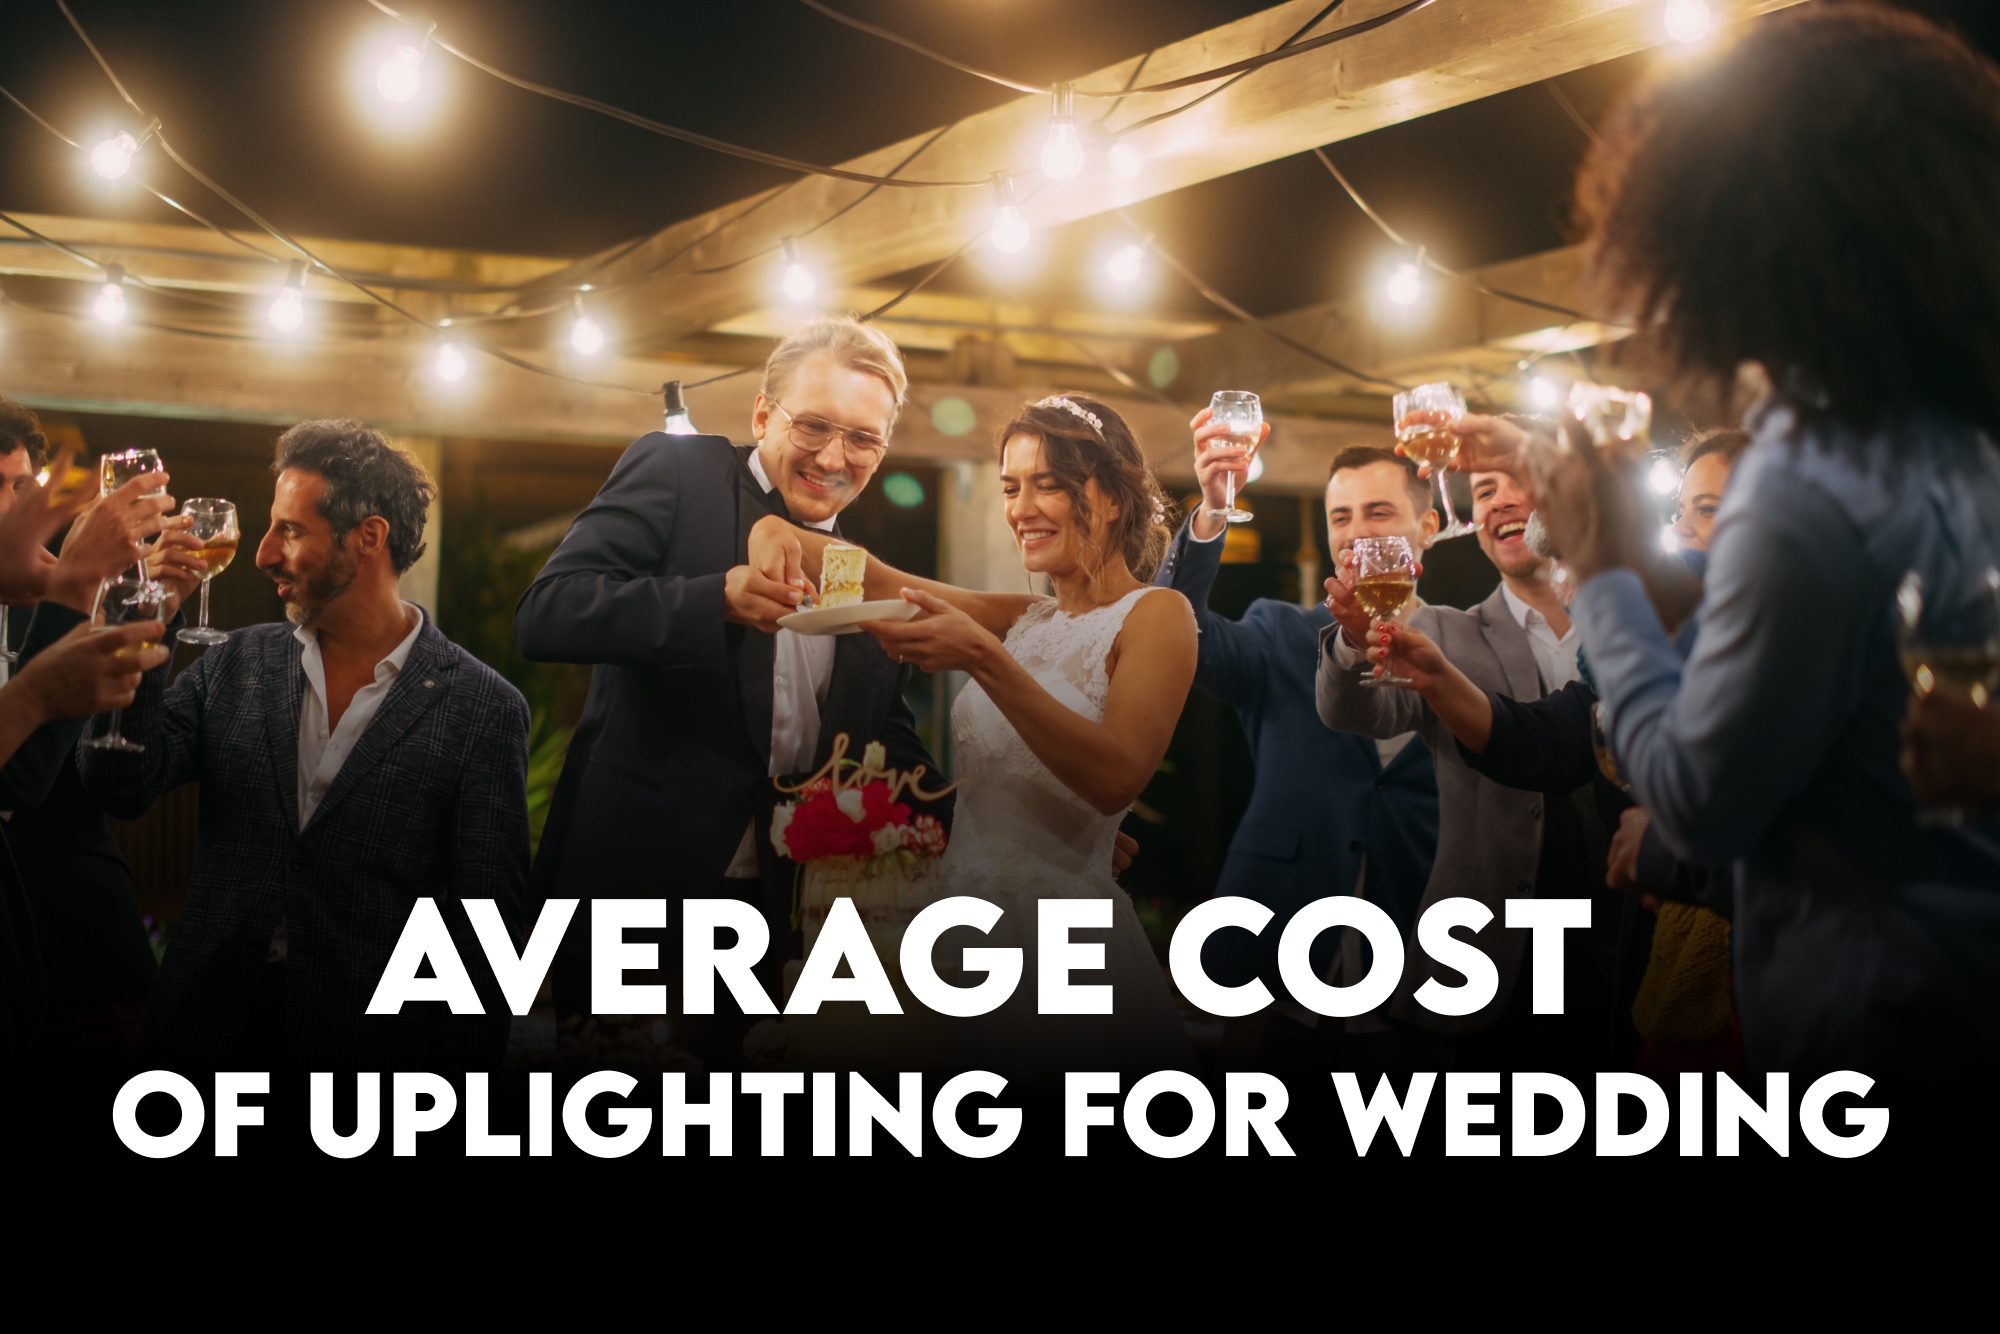 What is average cost of Uplighting for Wedding?